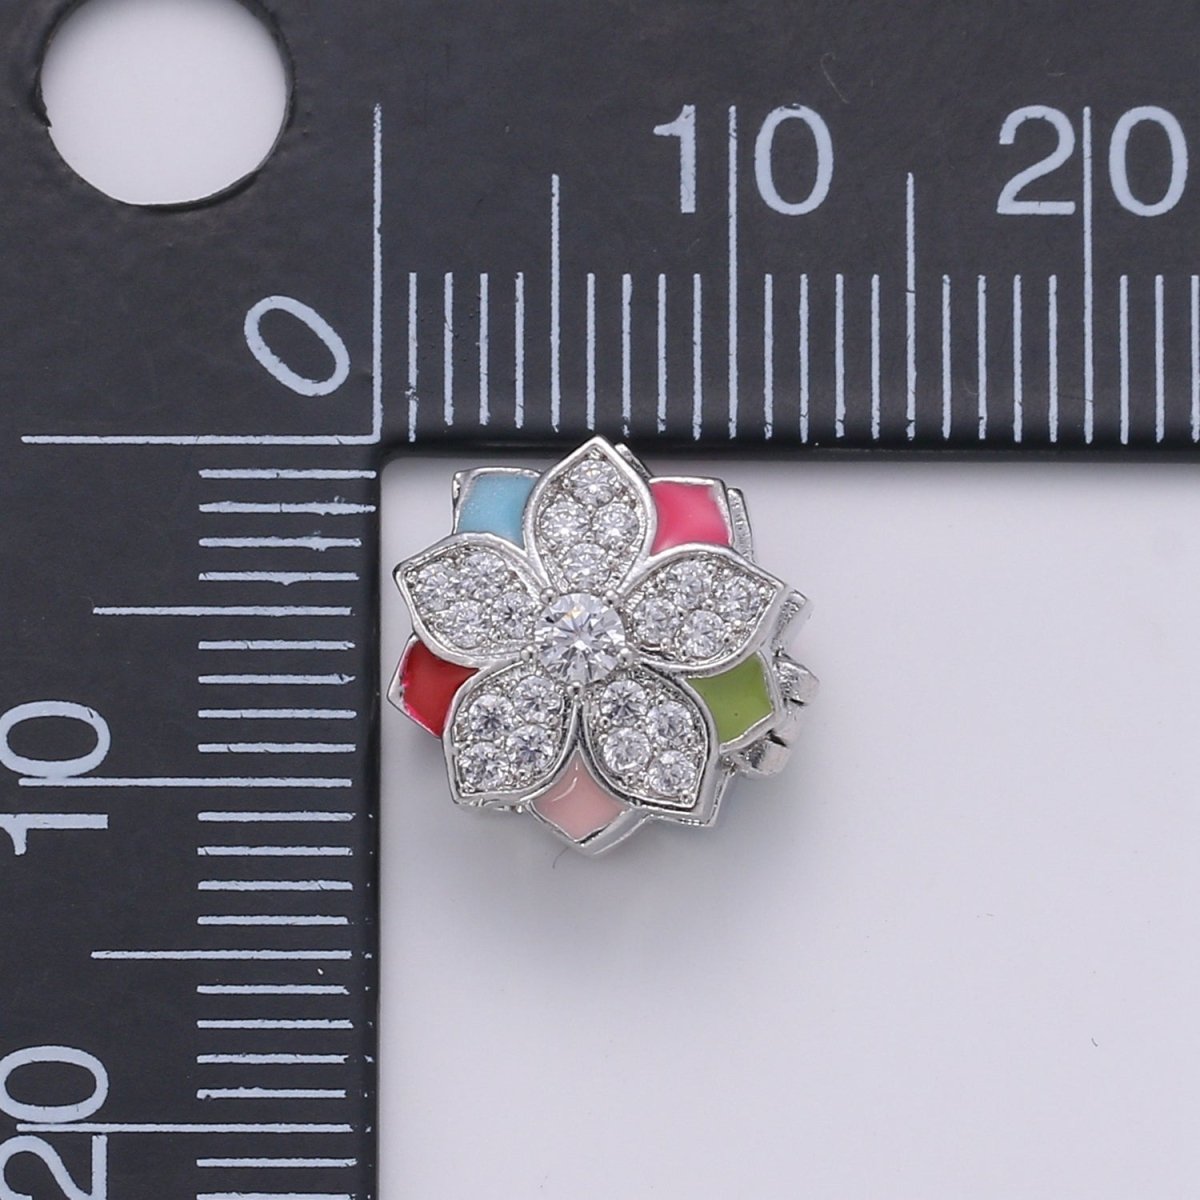 Crystal and Colorful Flower on Gold Filled Round Beads CZ Silver Floral Nature Jewelry Making Beads B361 - DLUXCA